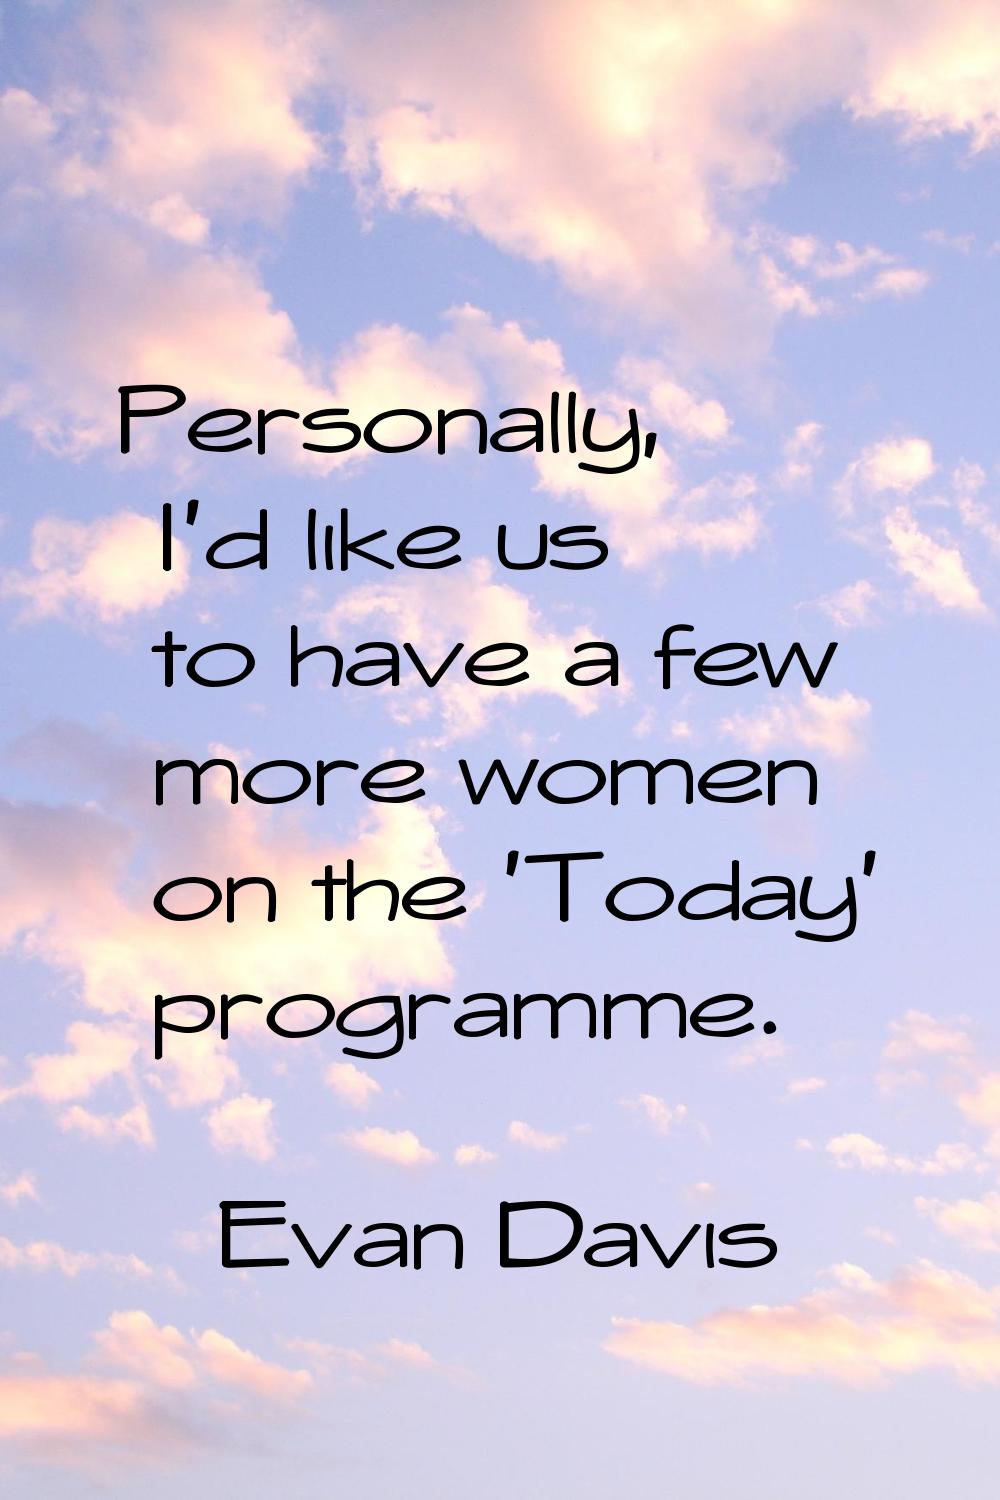 Personally, I'd like us to have a few more women on the 'Today' programme.